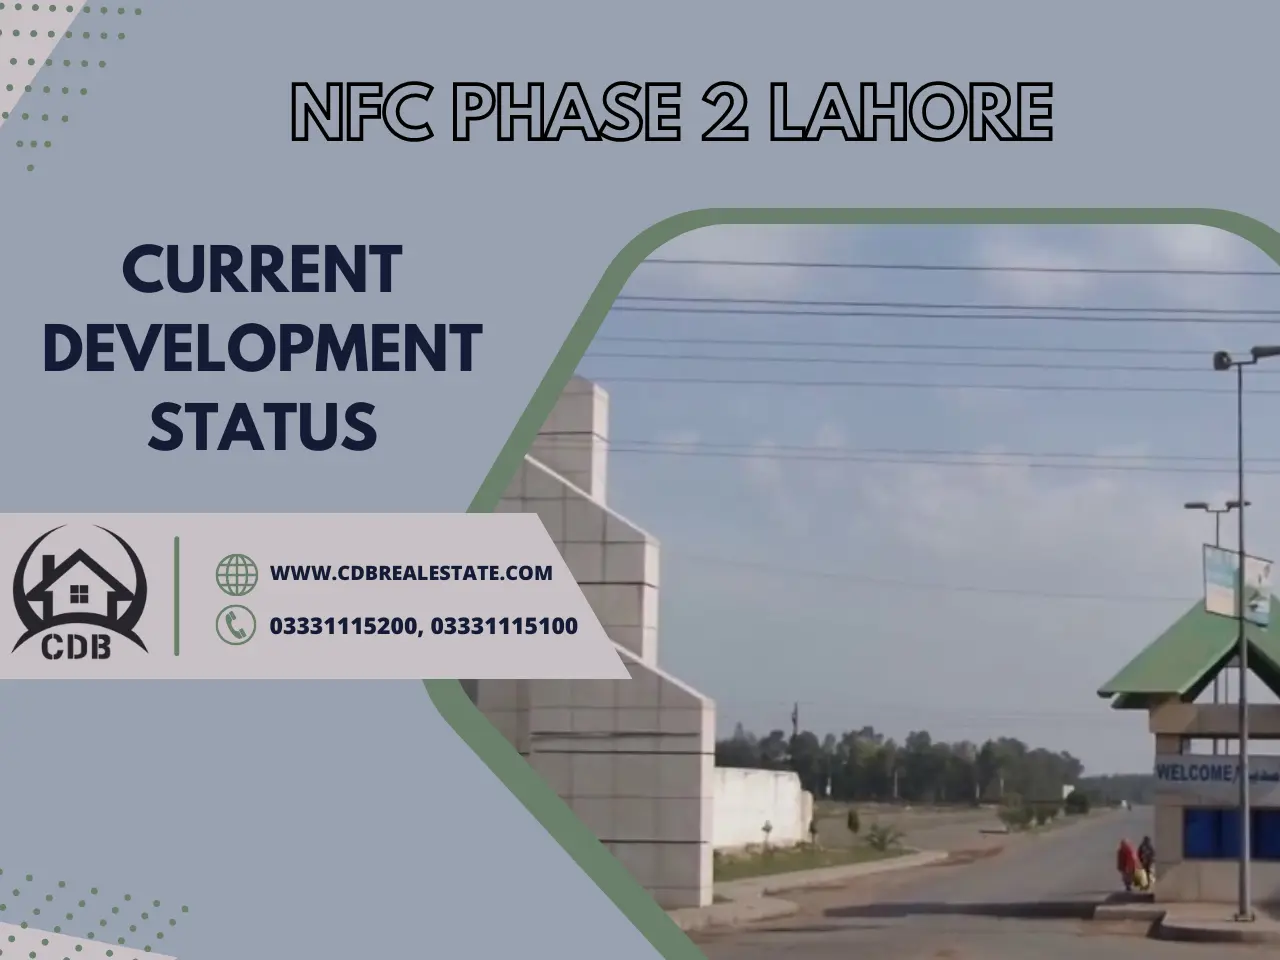 nfc phase 2 lahore